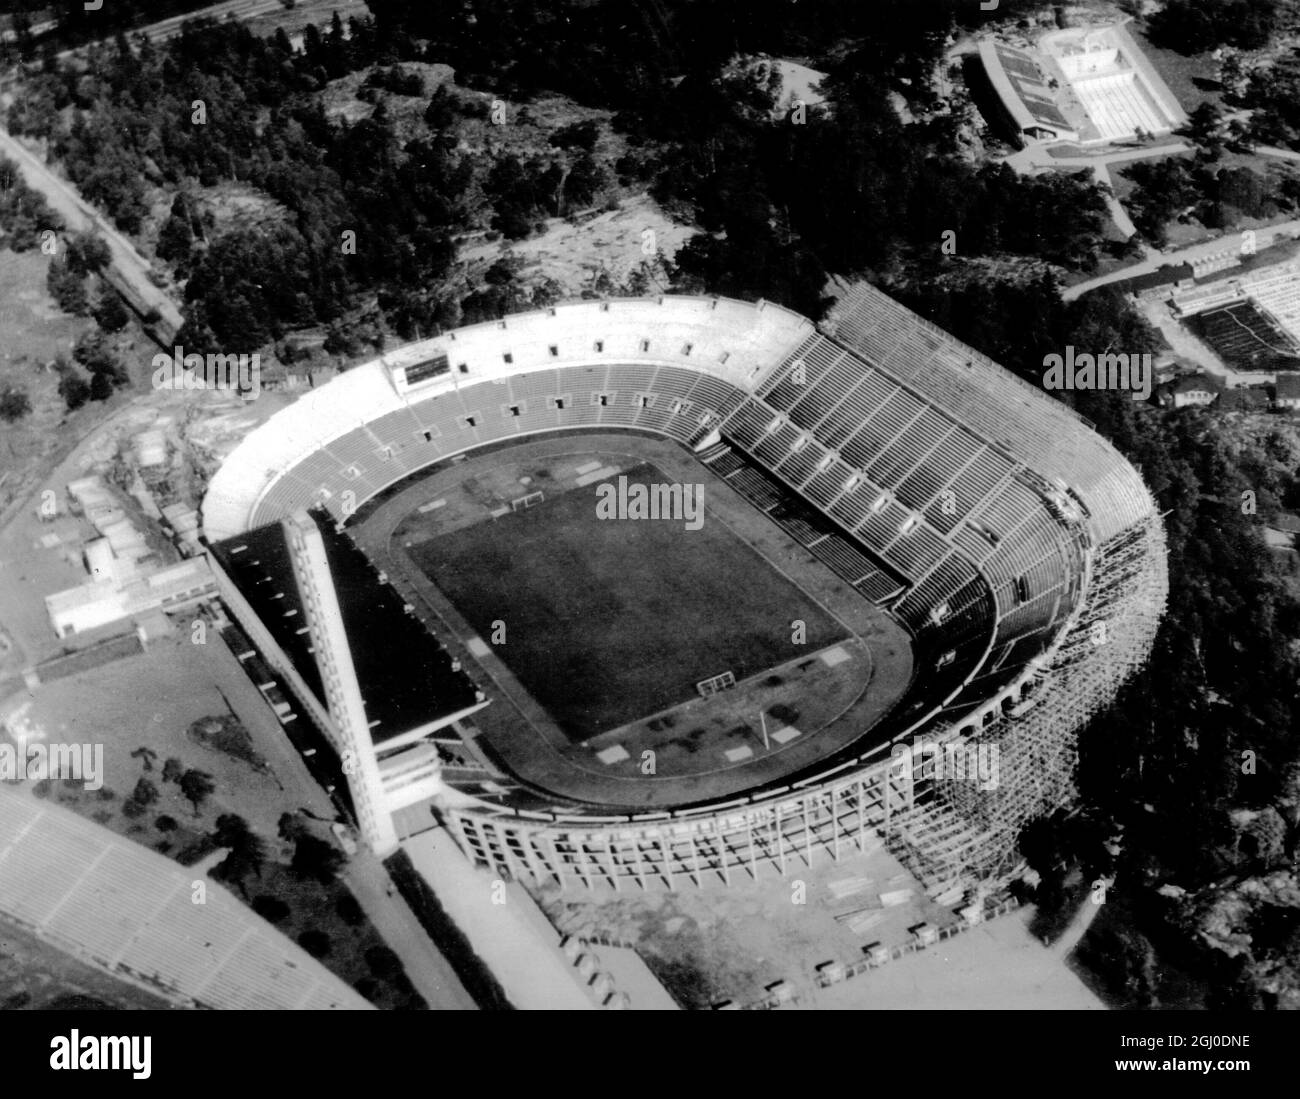 An aerial view of the Helsinki stadium where the 1952 Olympic Games will be held. The stadium, now being enlarged in readiness for this world event, was to have been used for the 1940 Olympics which was cancelled owing to the war. 3rd October 1950. Stock Photo